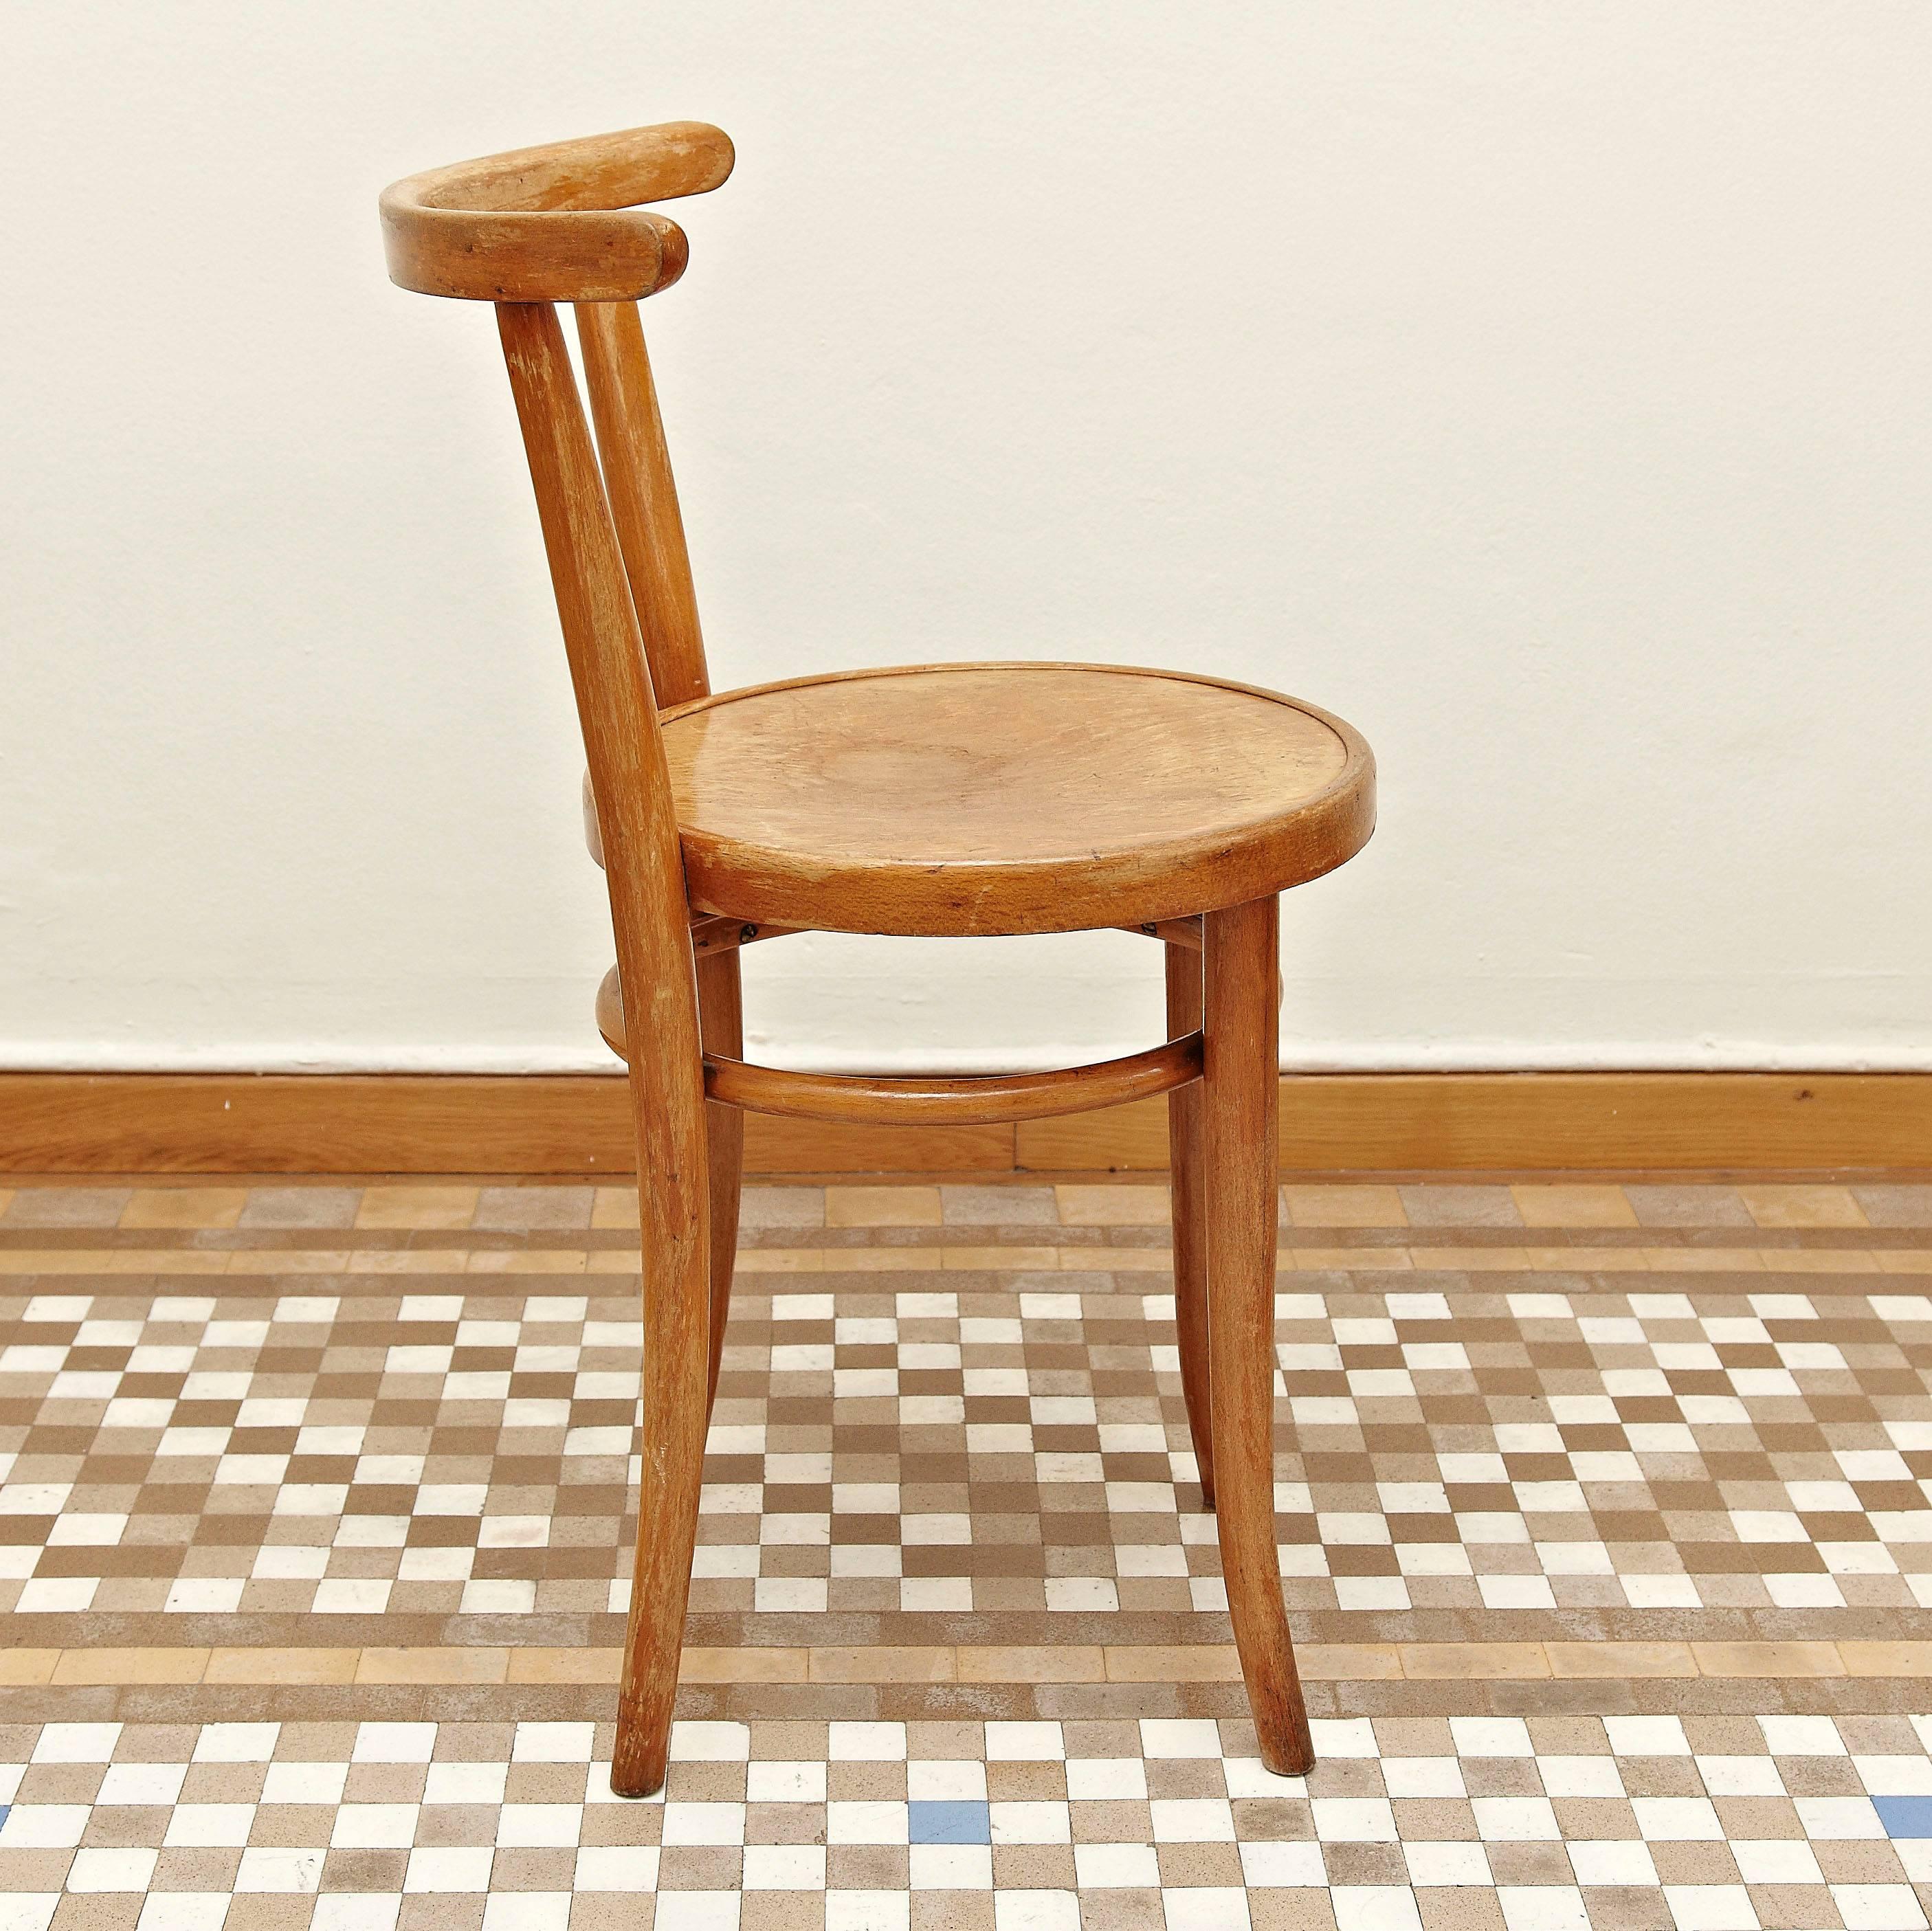 Thonet 51 by Auguste Thonet for Thonet manufactured In Germany.
Bentwood.

In good original condition, with minor wear consistent with age and use, preserving a beautiful patina.

In the 1830s, Thonet began trying to make furniture out of glued